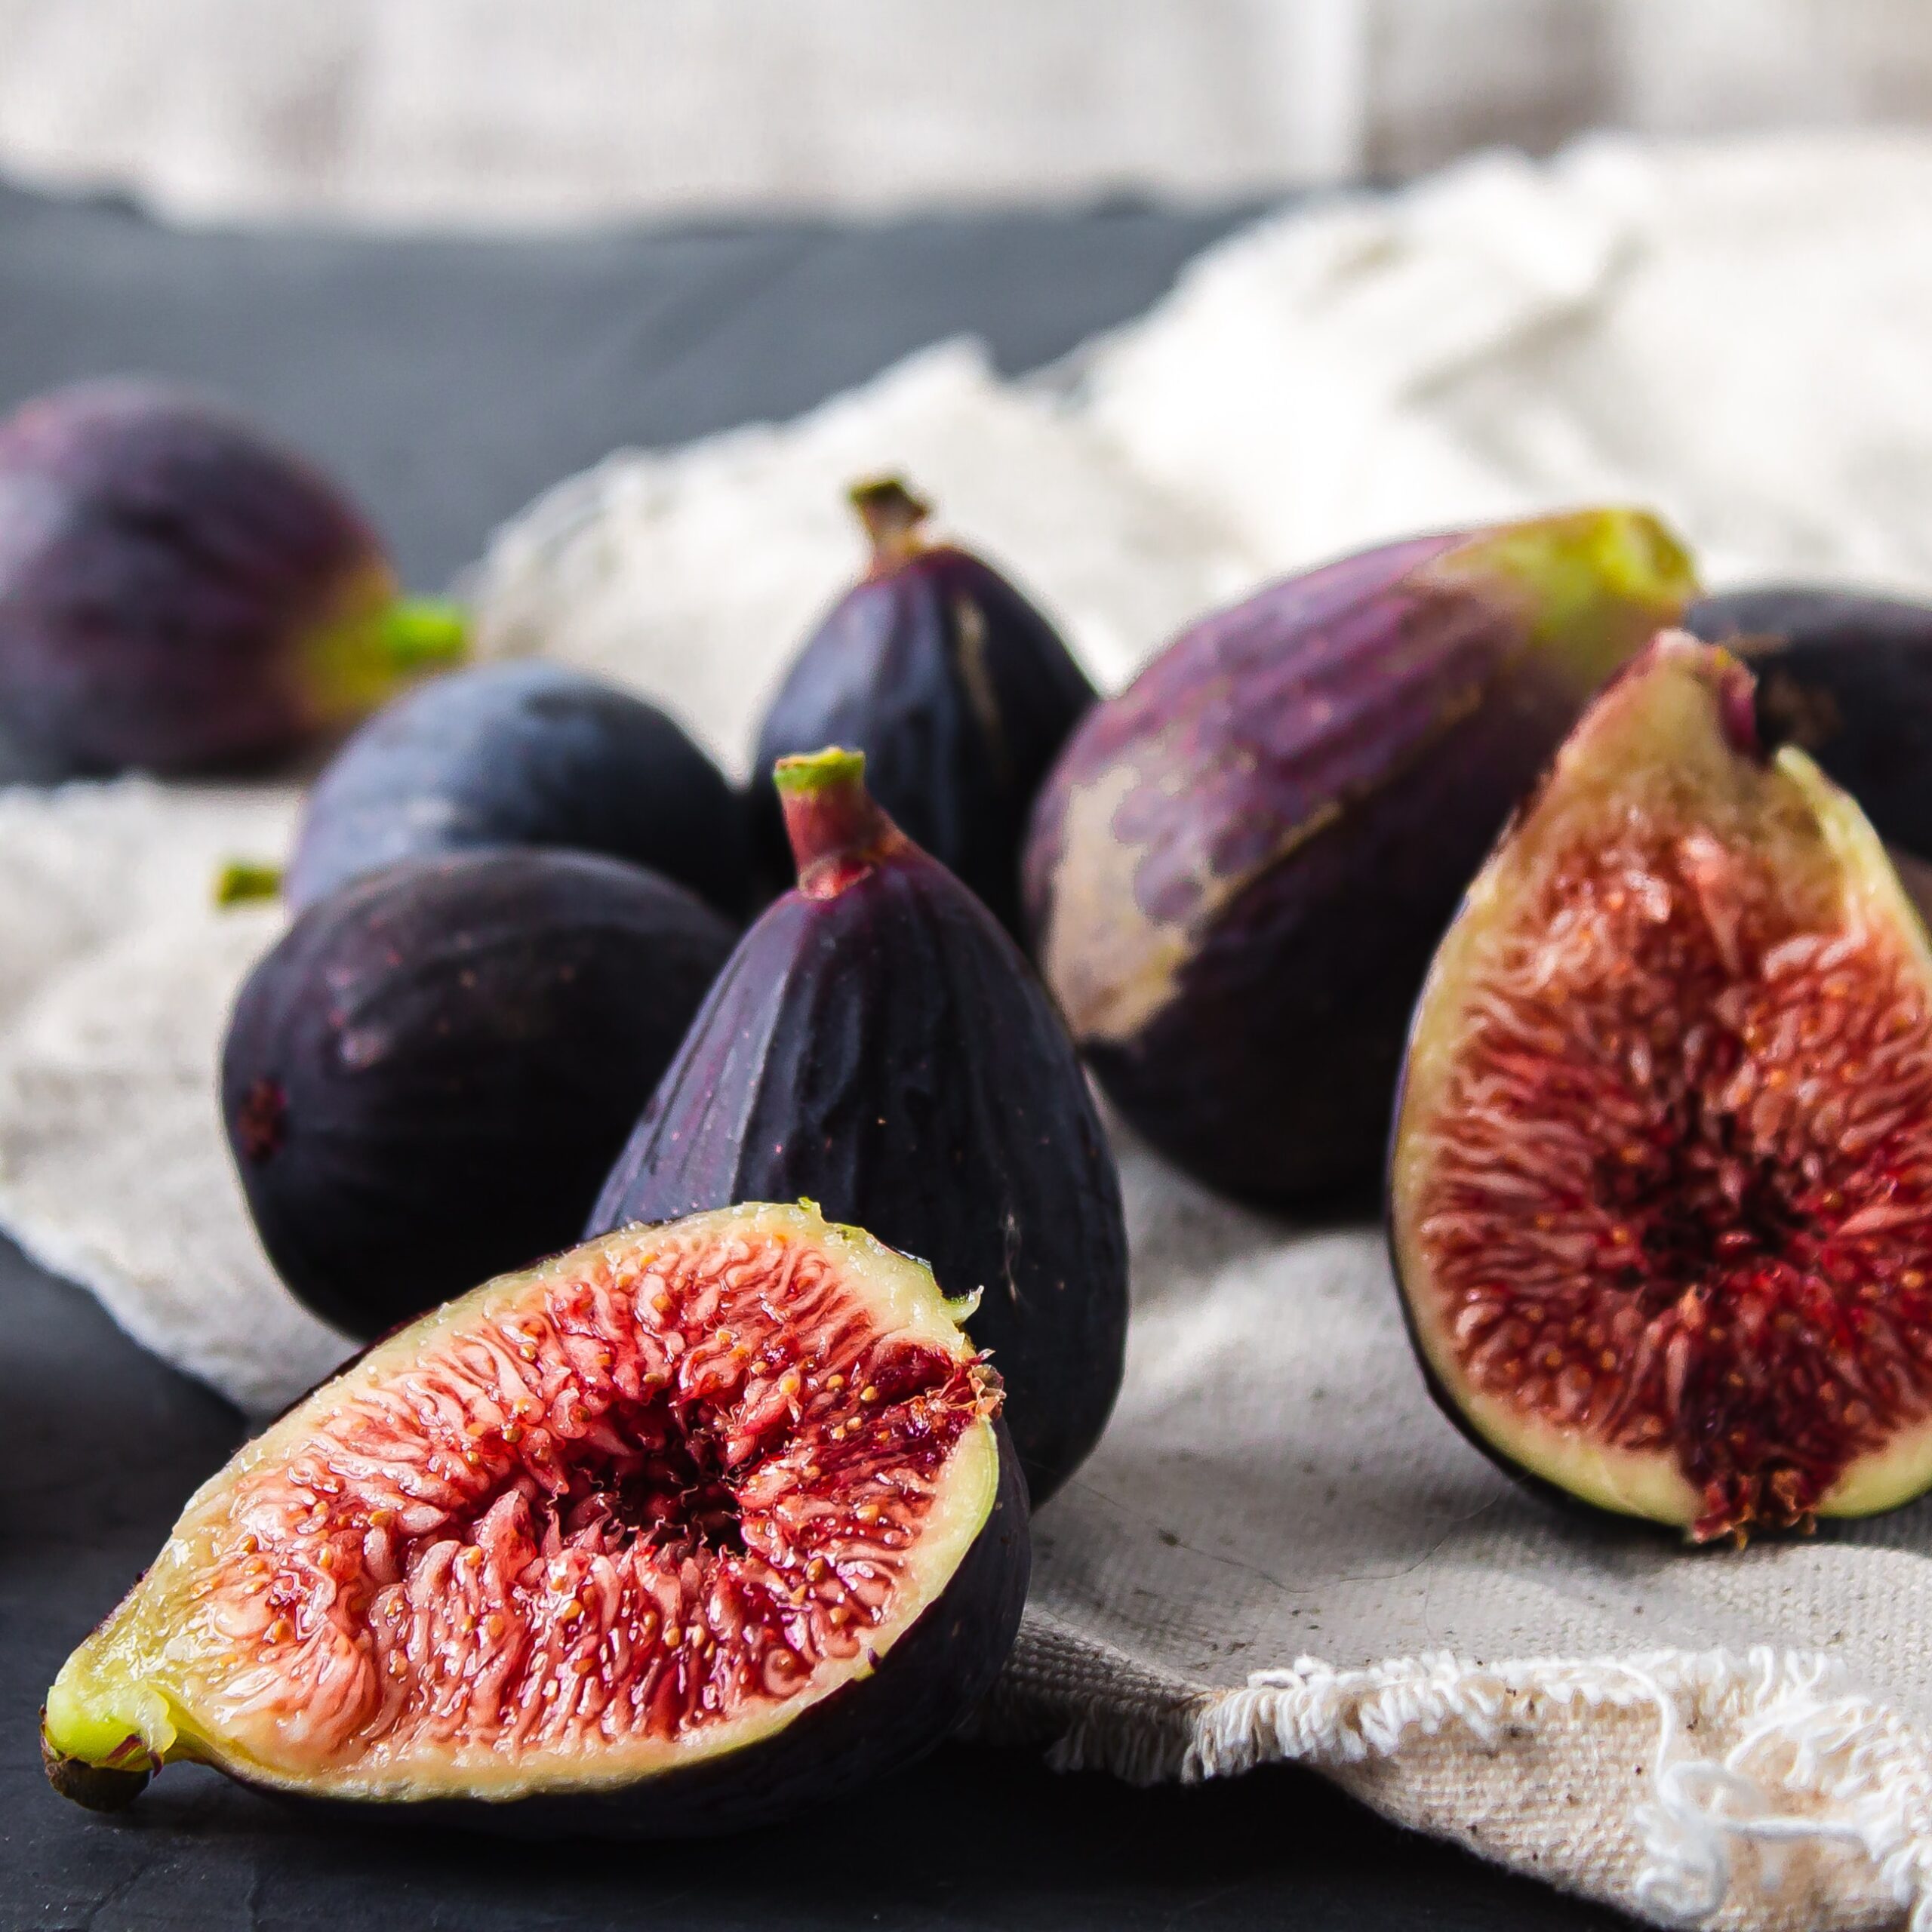 Figs, learn heath benefits and great cooking tips by Cassandra Austin of Casstronomy